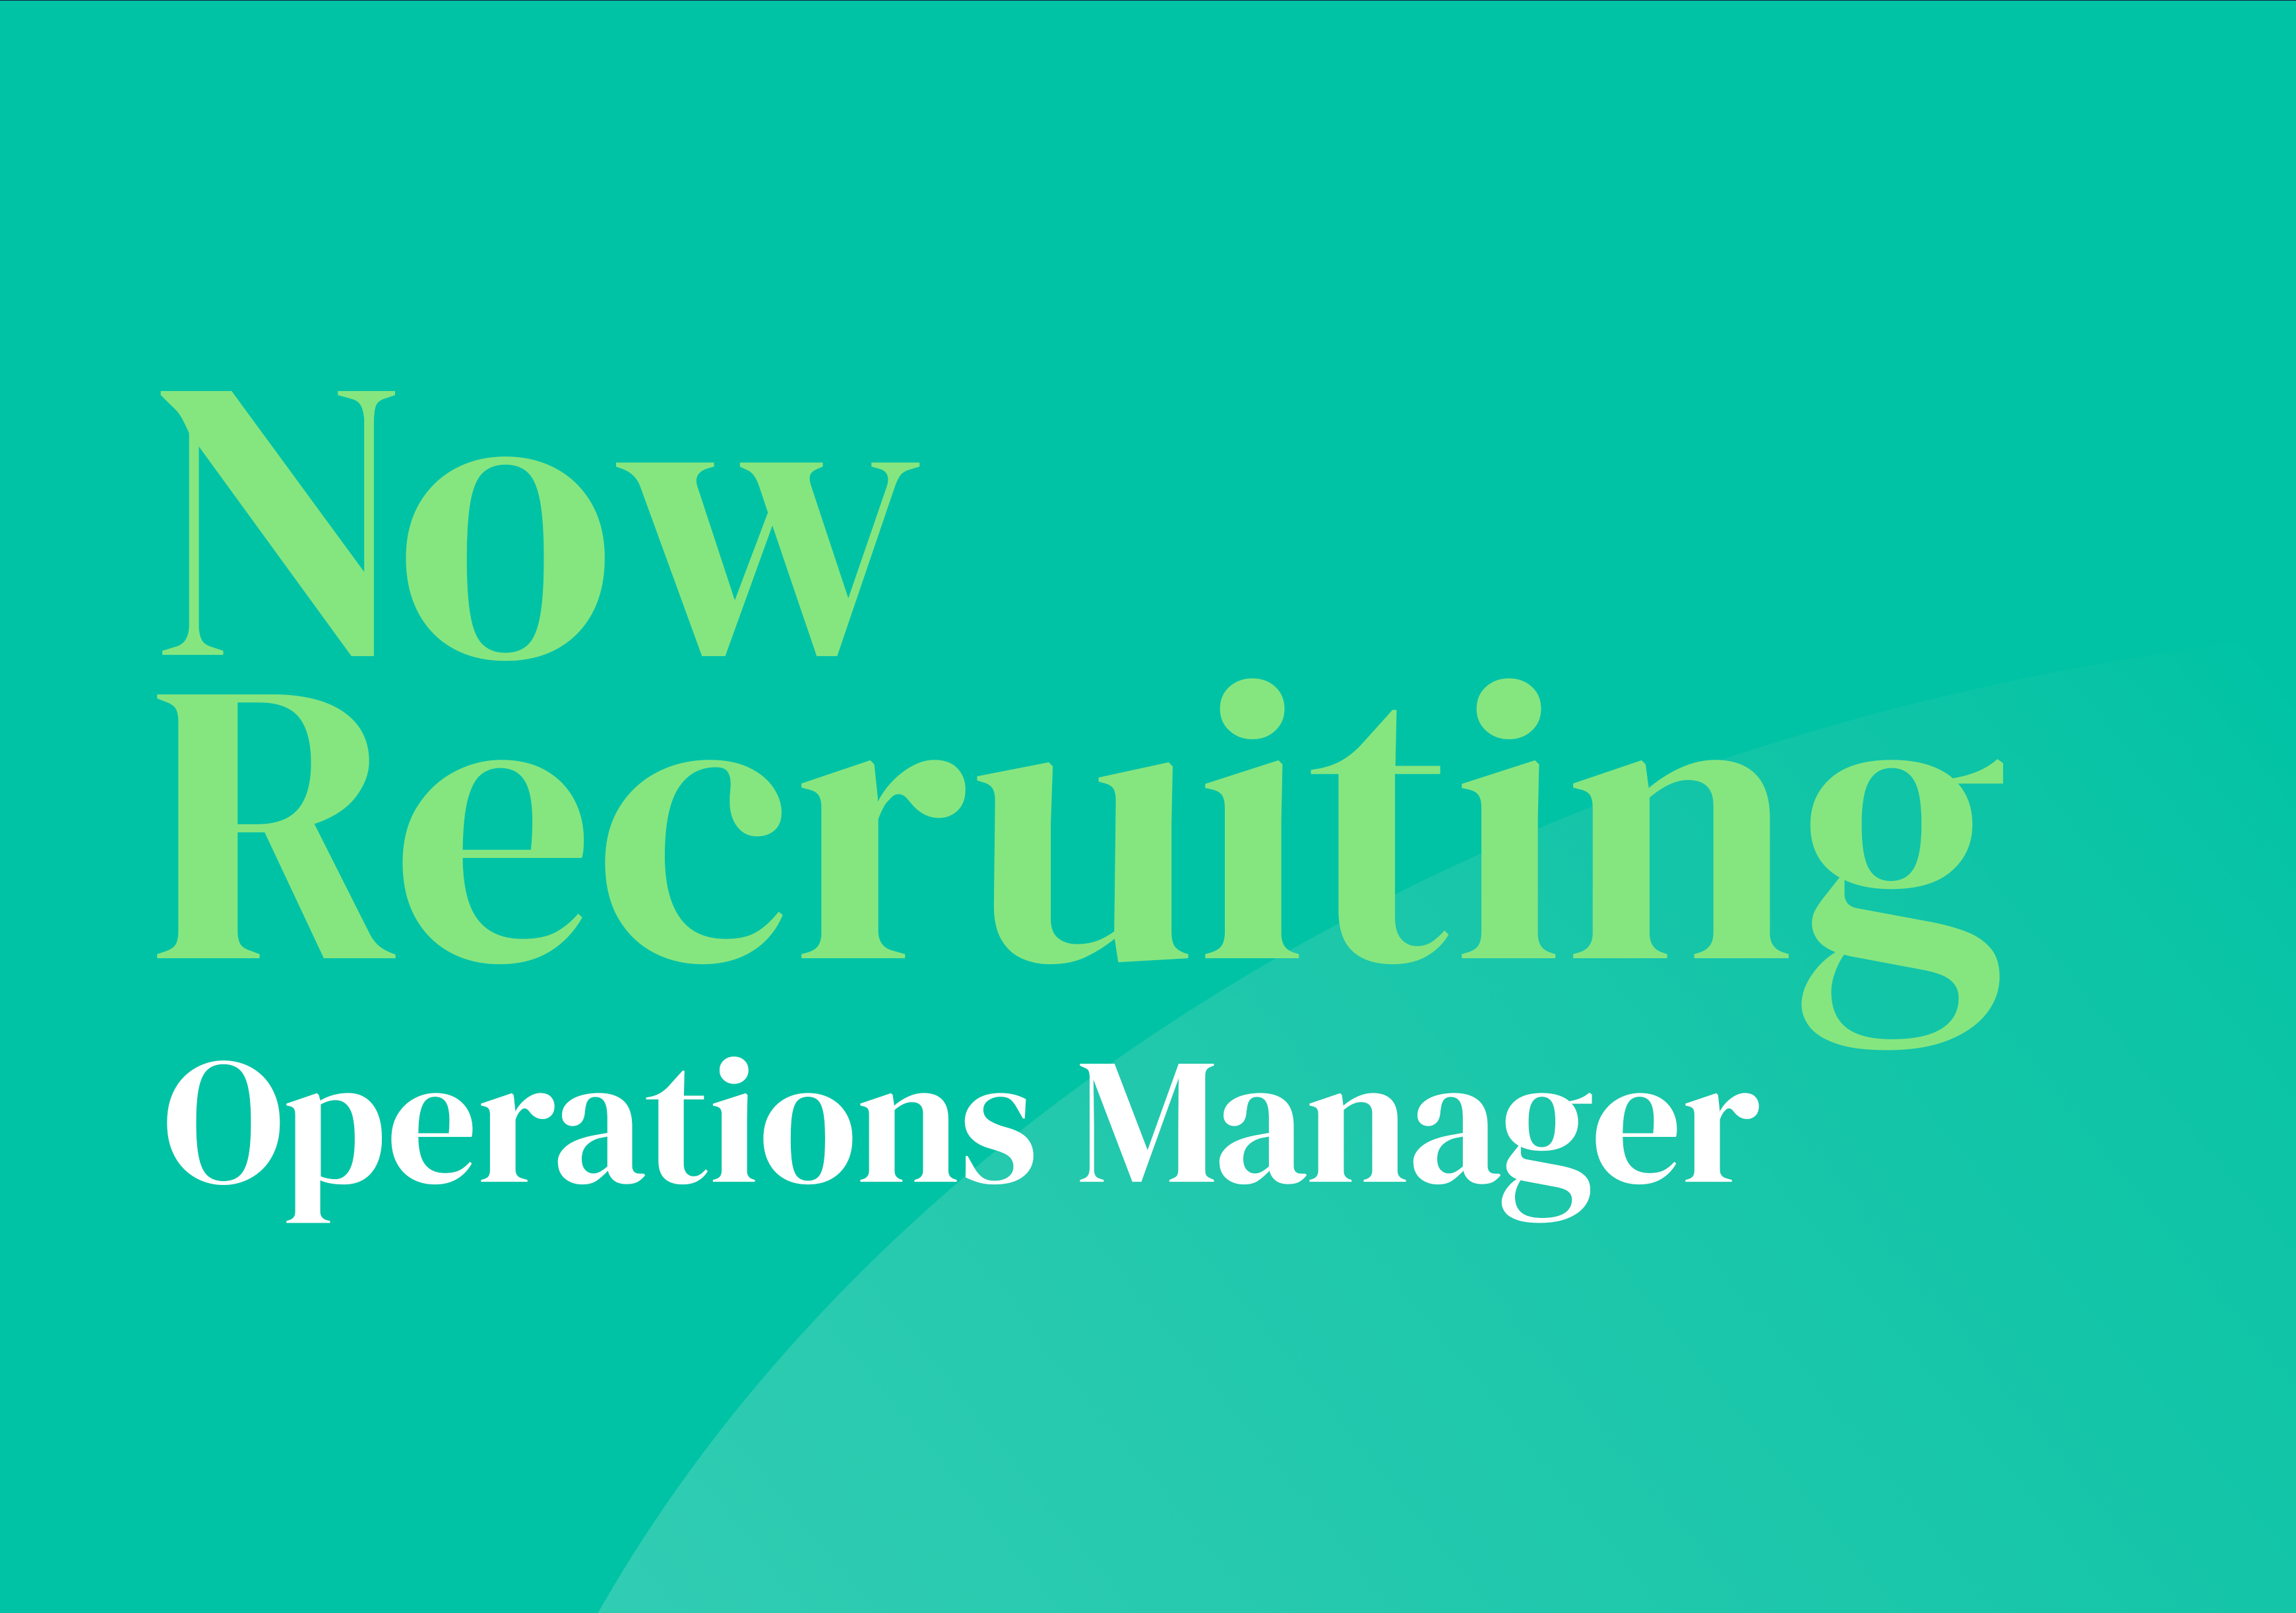 Now Recruiting Operations Manager